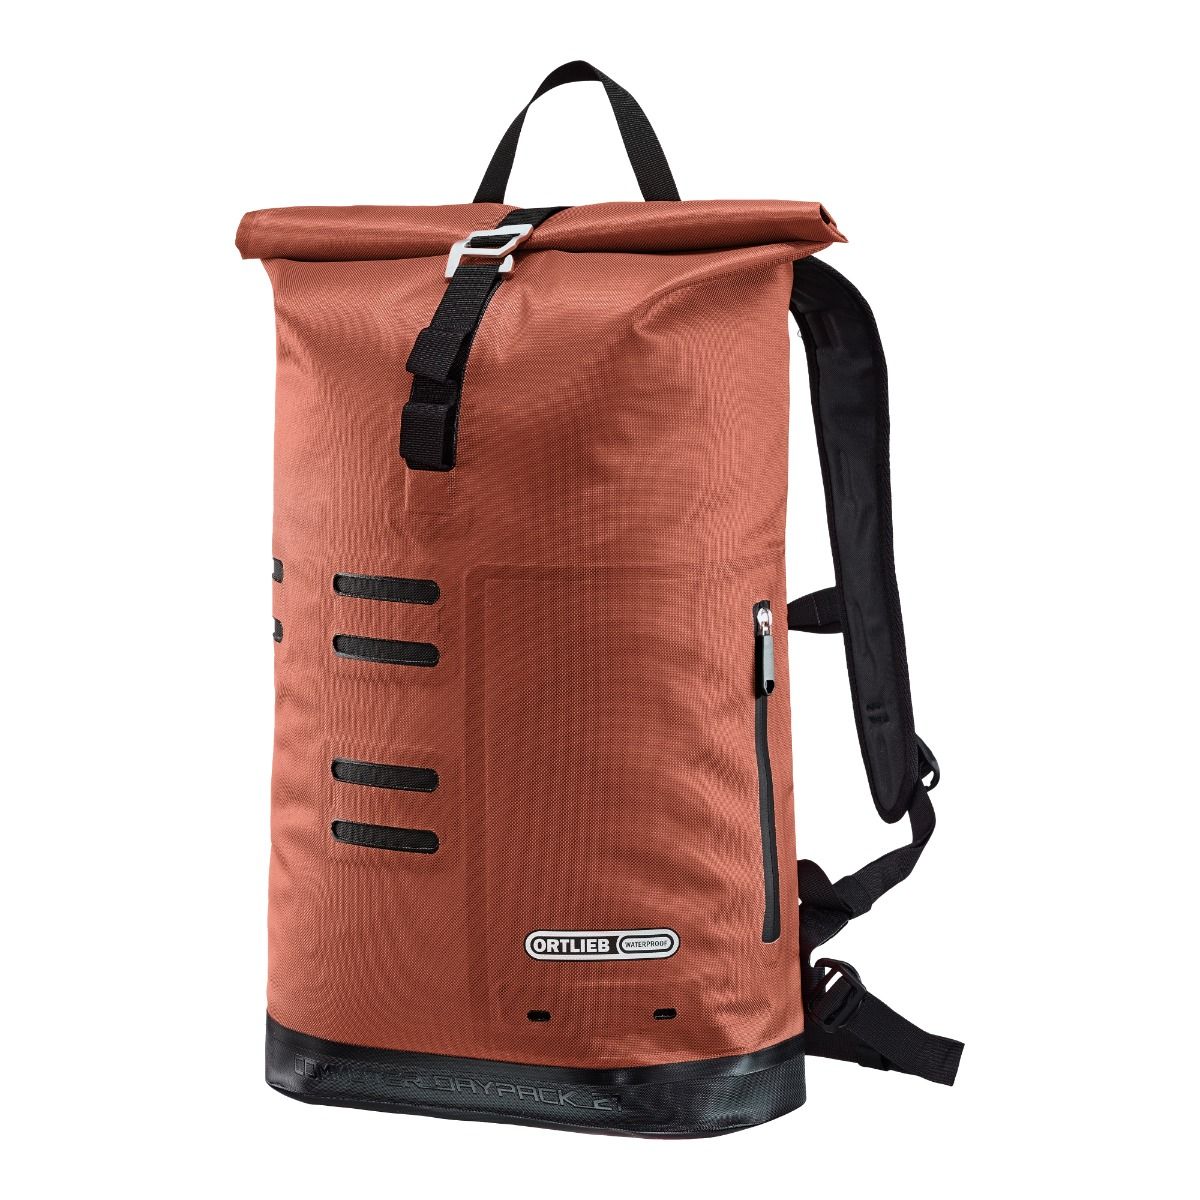 ORTLIEB Commuter-Daypack 21L - rooibos